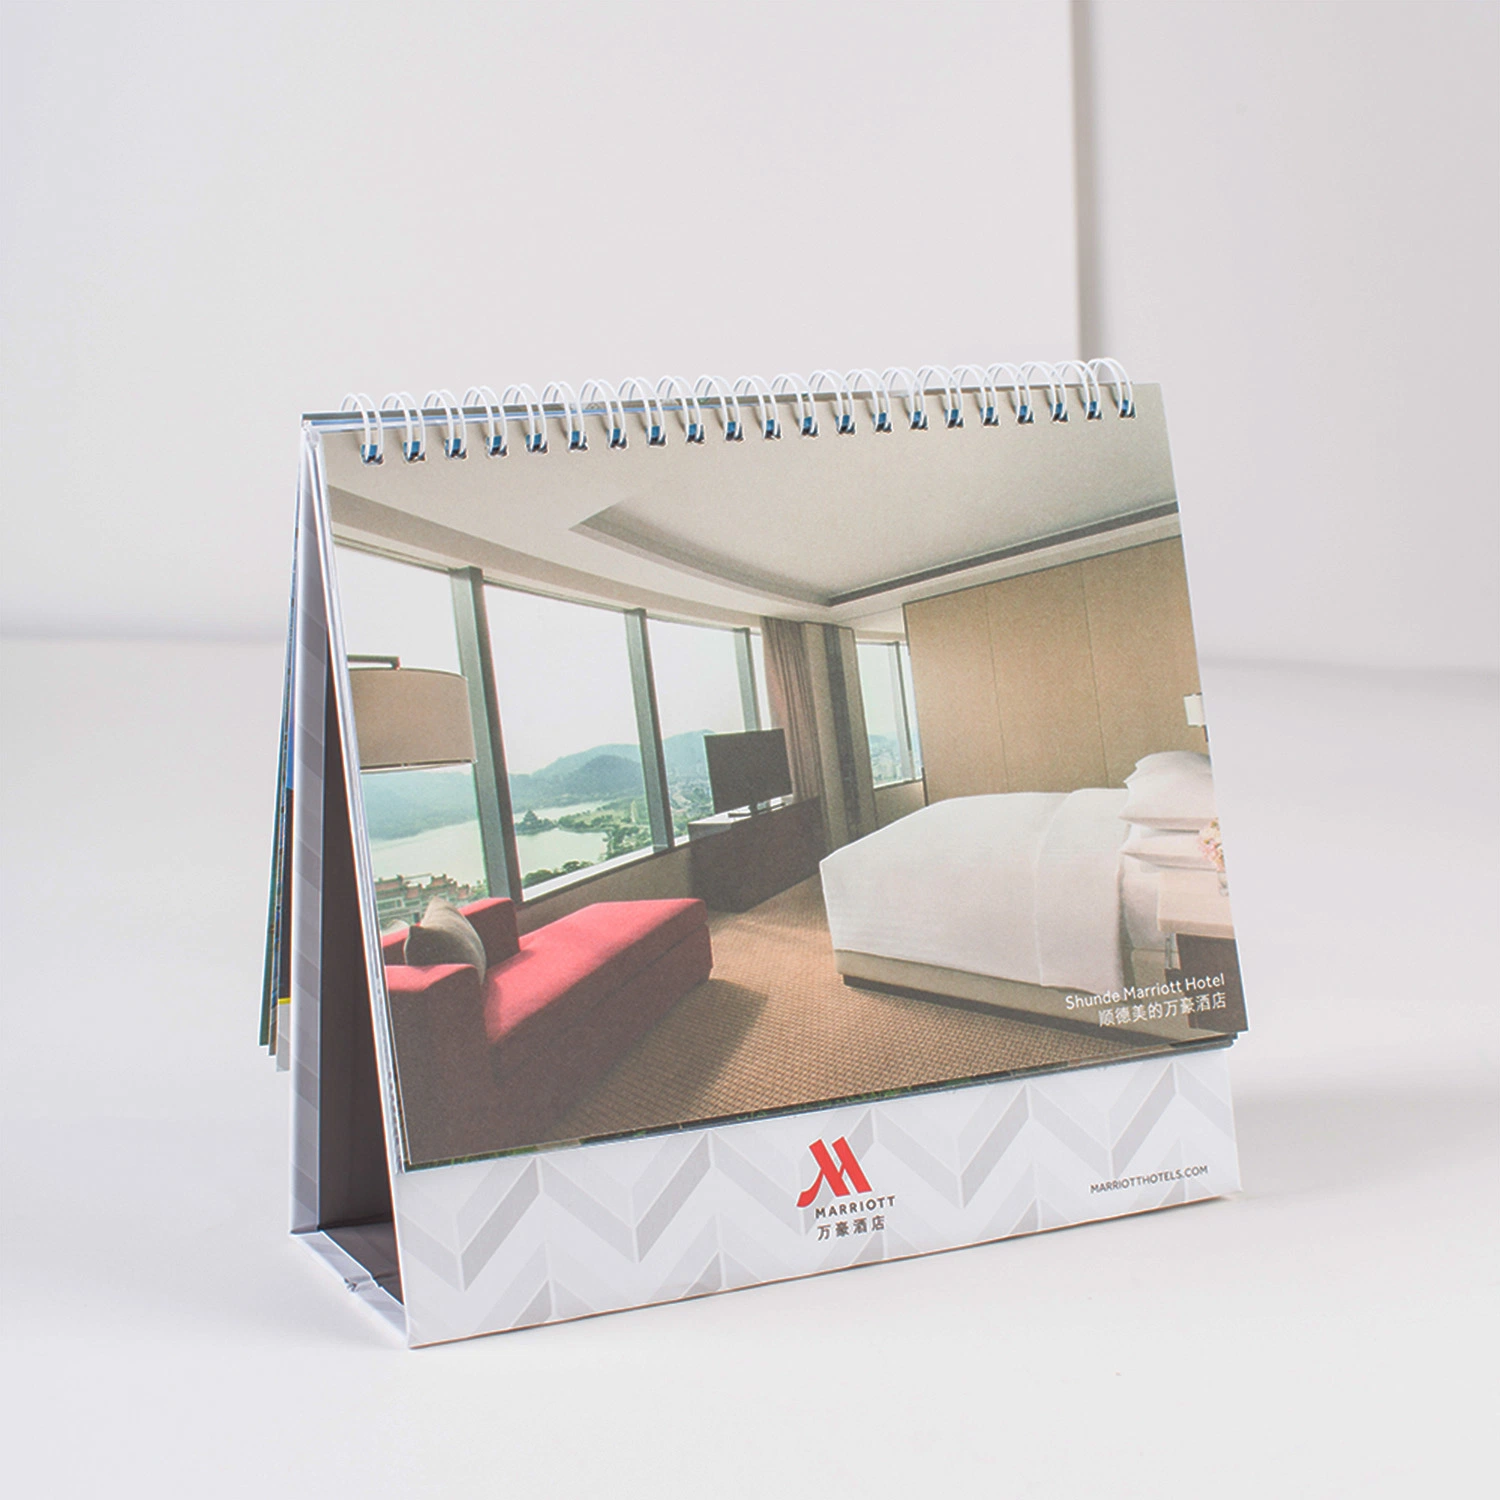 China Wholesale/Supplier Company Customized Printing Service for Desk Calendar